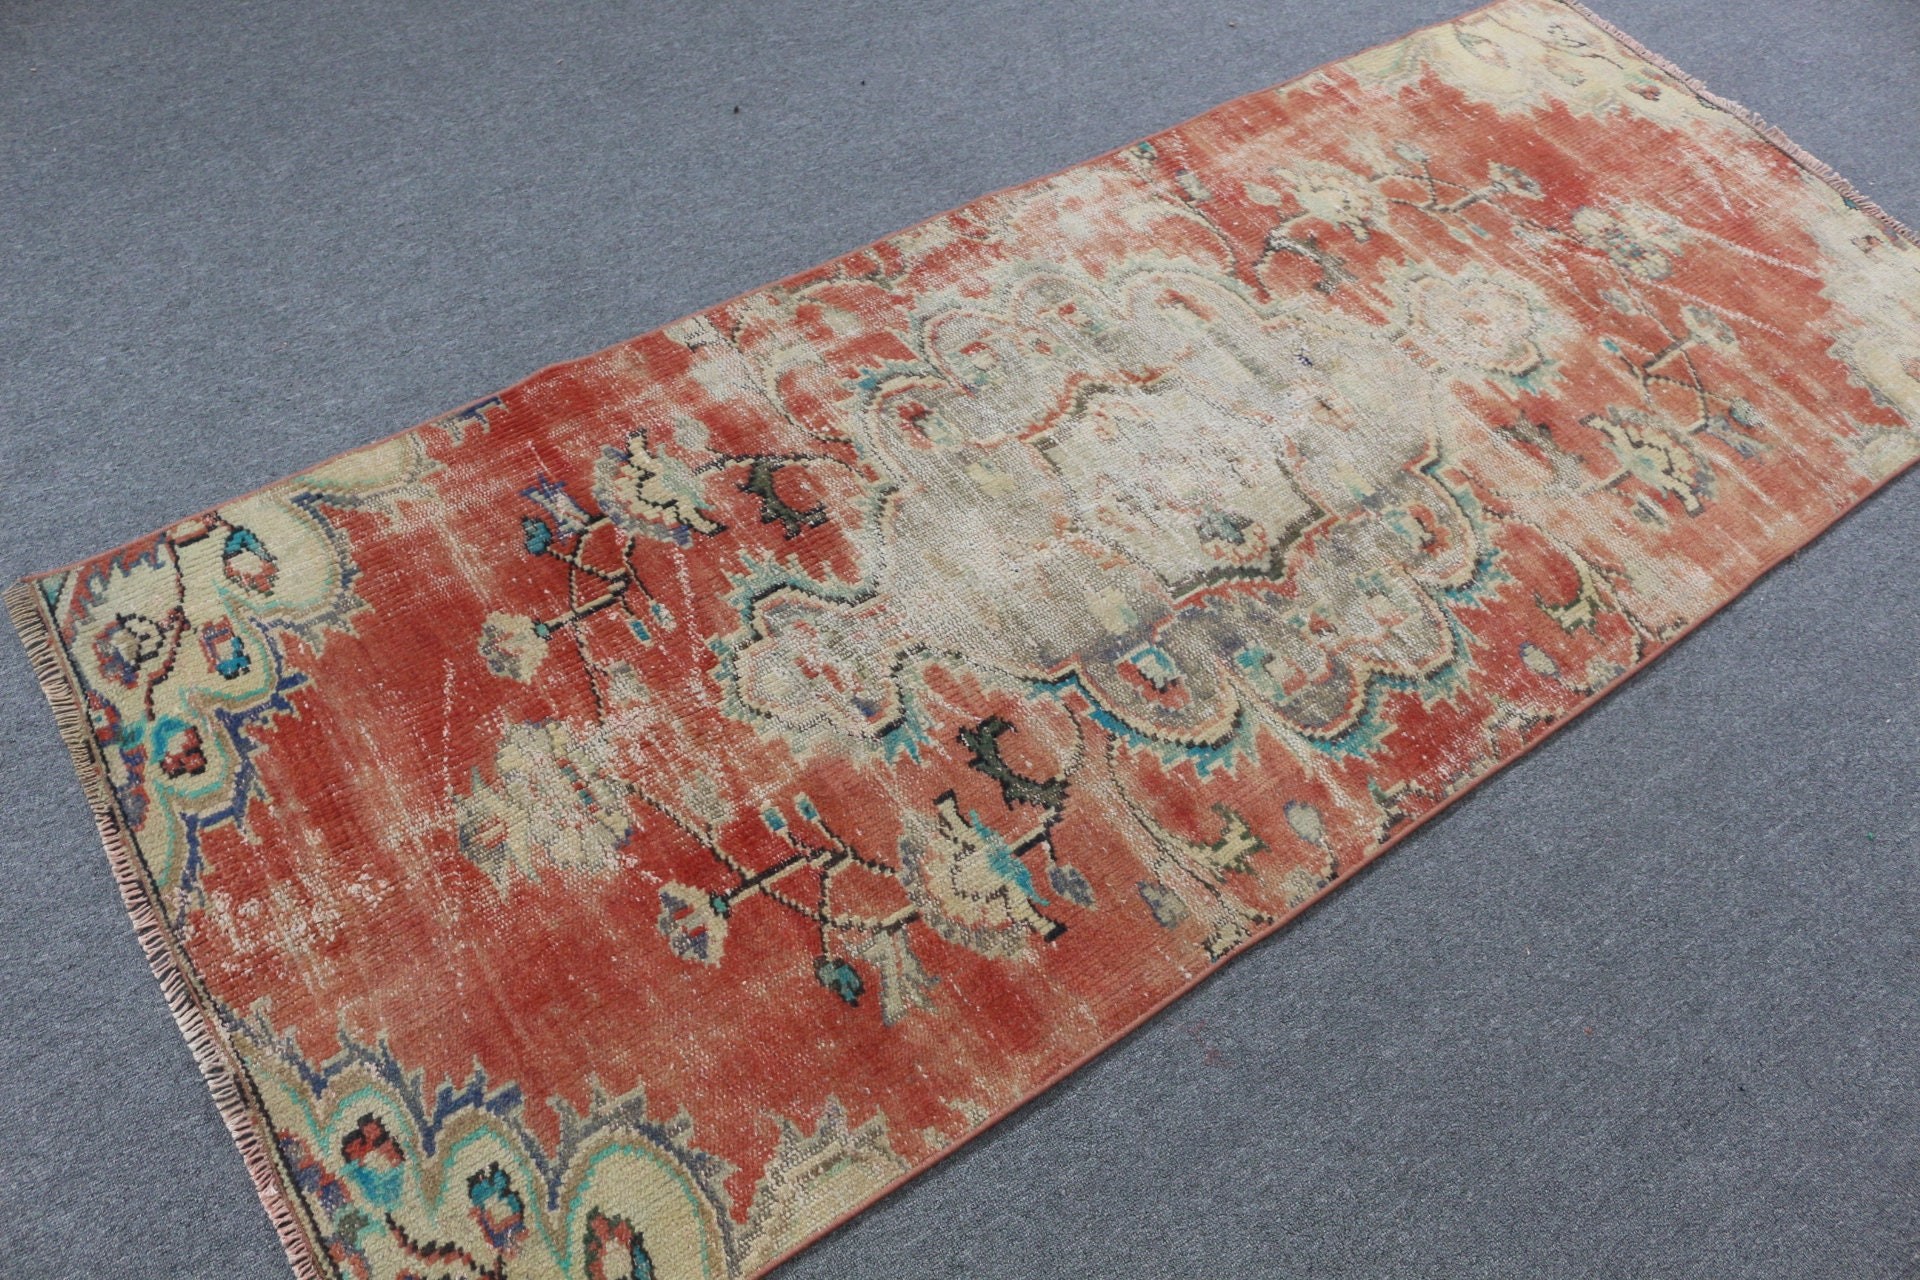 Red Oriental Rugs, Moroccan Rugs, Vintage Rugs, 3.1x7.4 ft Accent Rugs, Nursery Rug, Rugs for Kitchen, Kitchen Rug, Wool Rugs, Turkish Rug